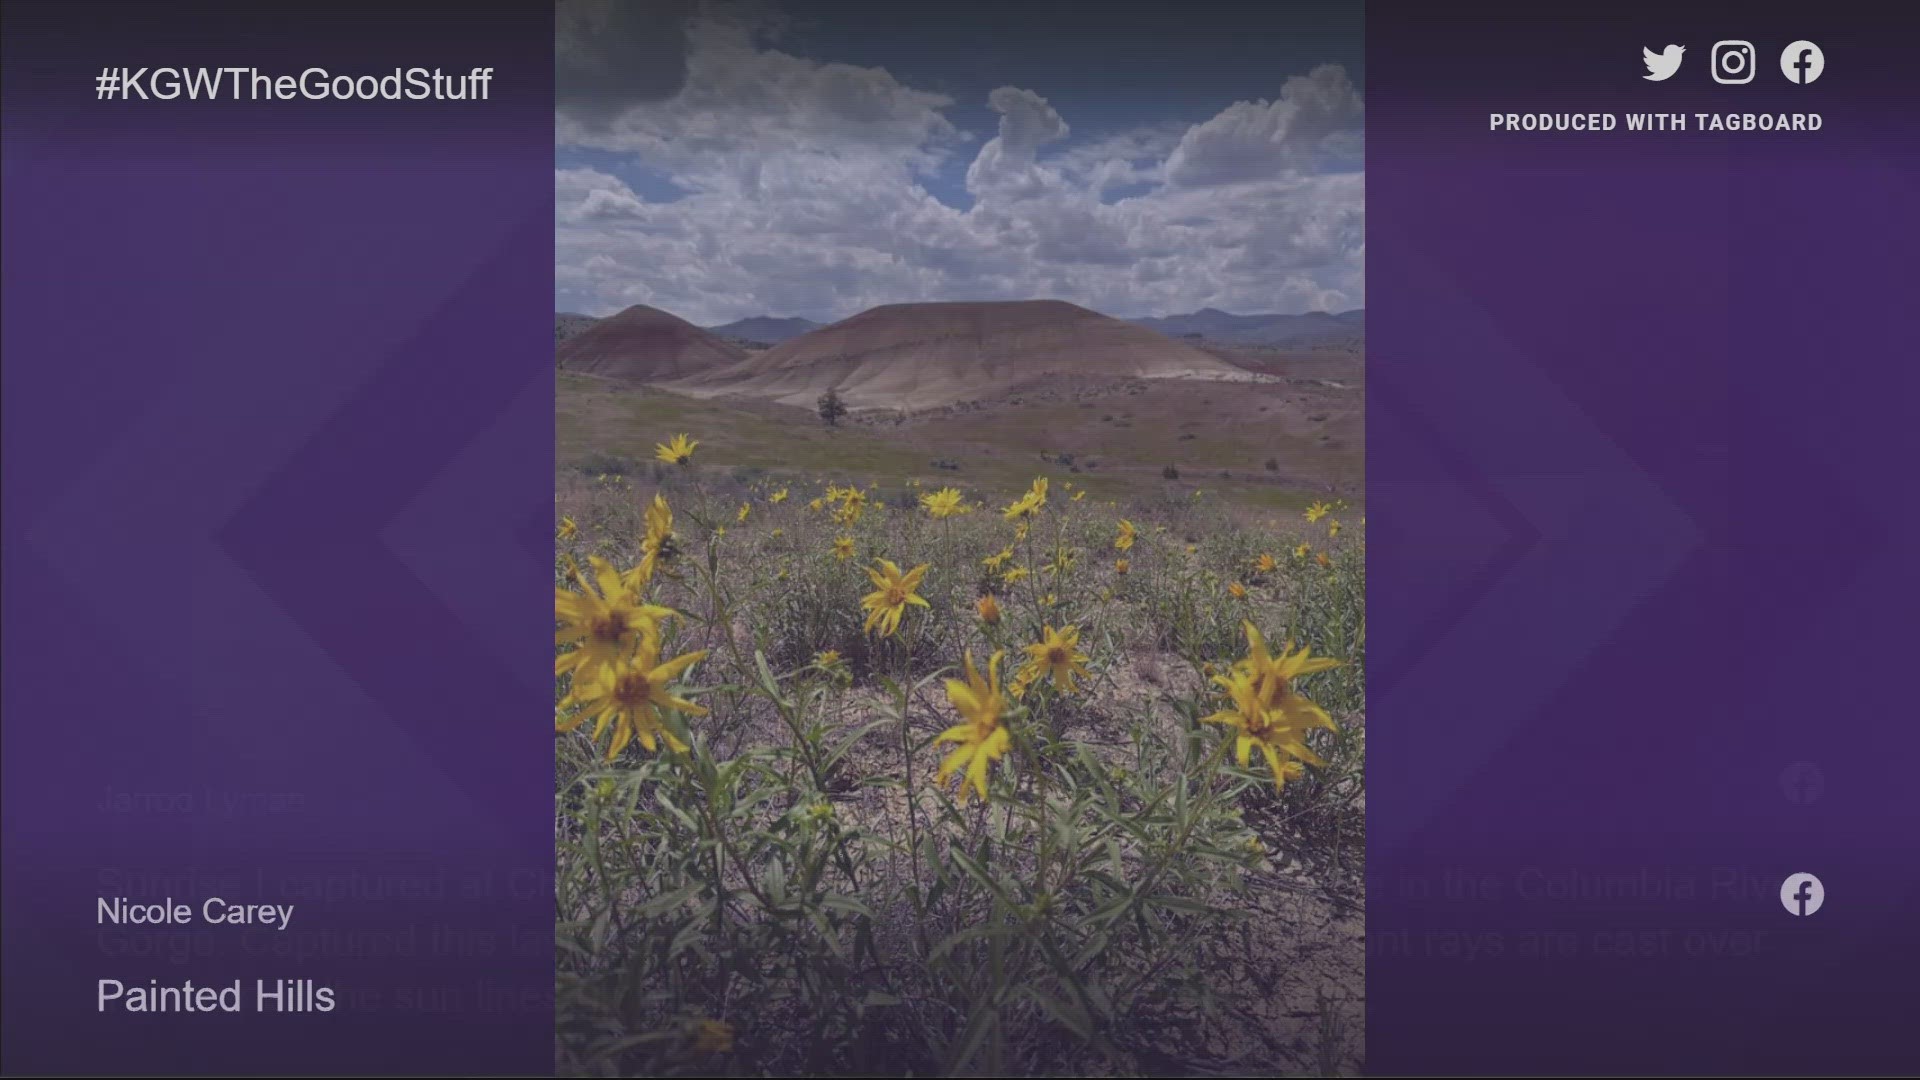 On The Good Stuff, viewers shared the ways they explore the outdoors.